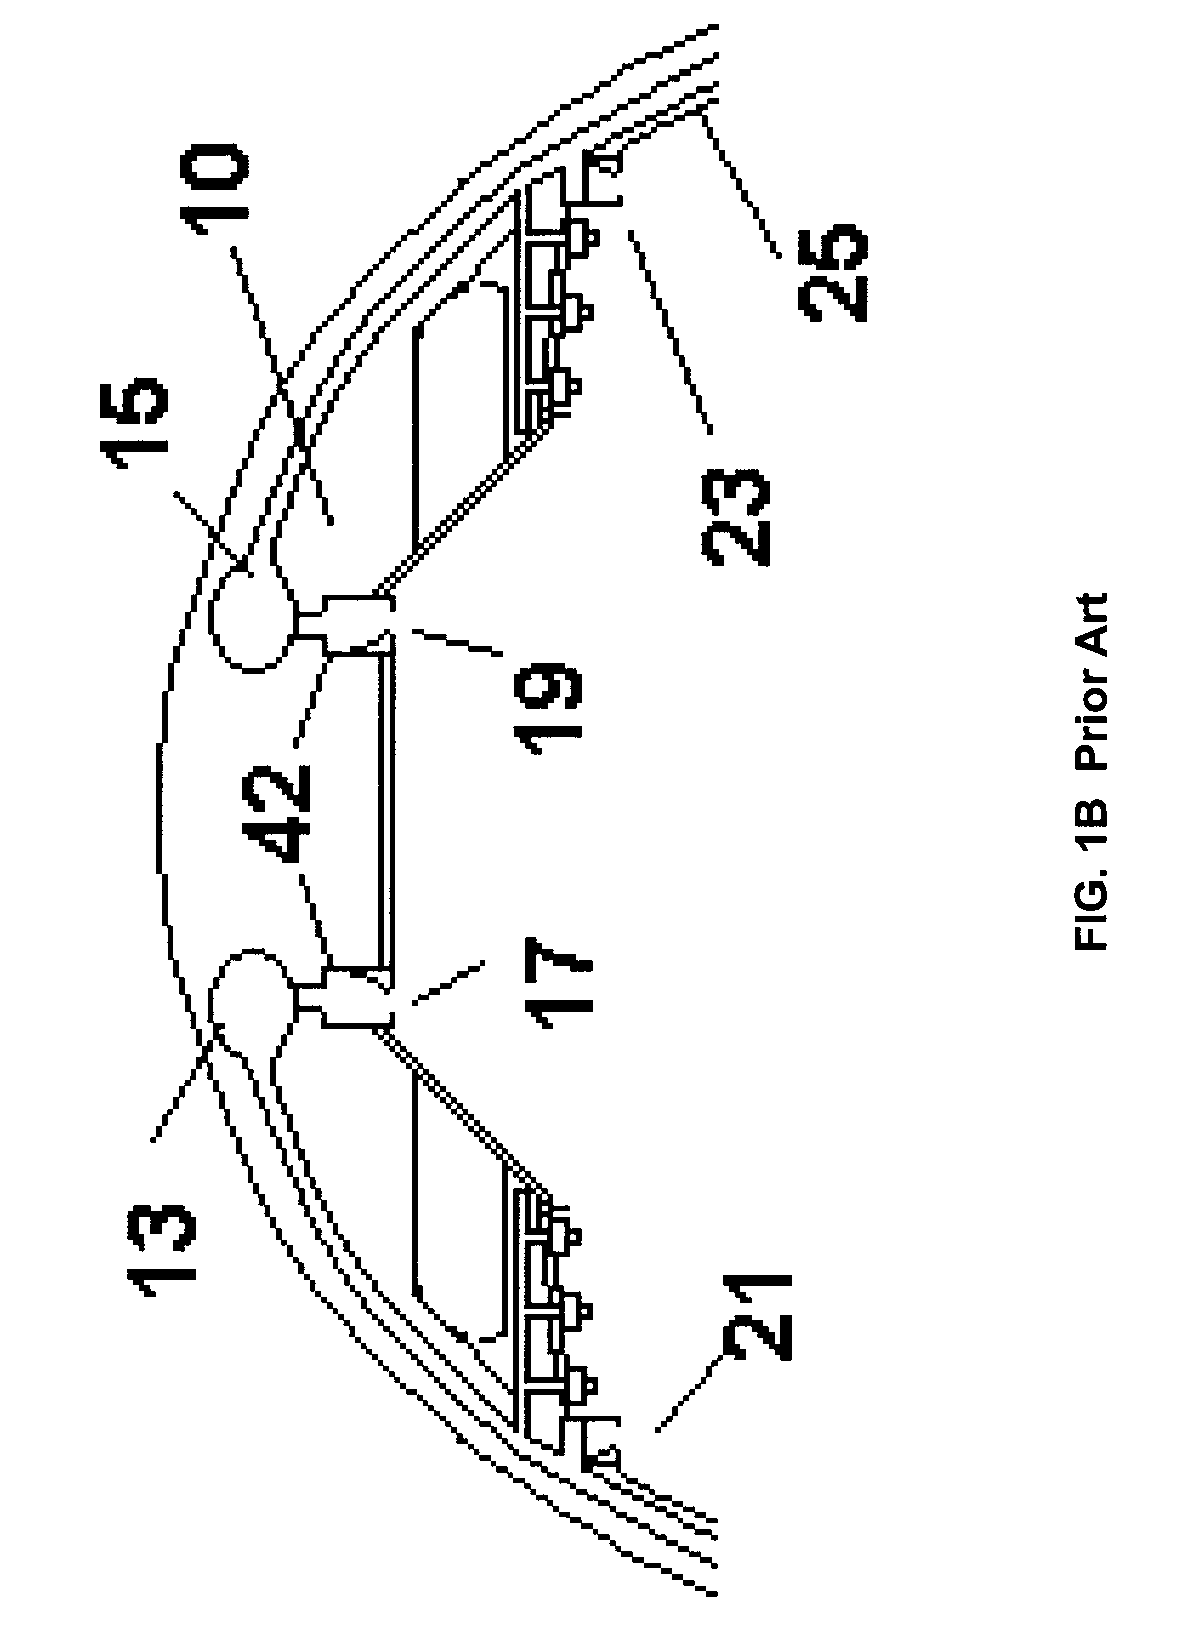 Entrainment air flow control and filtration devices